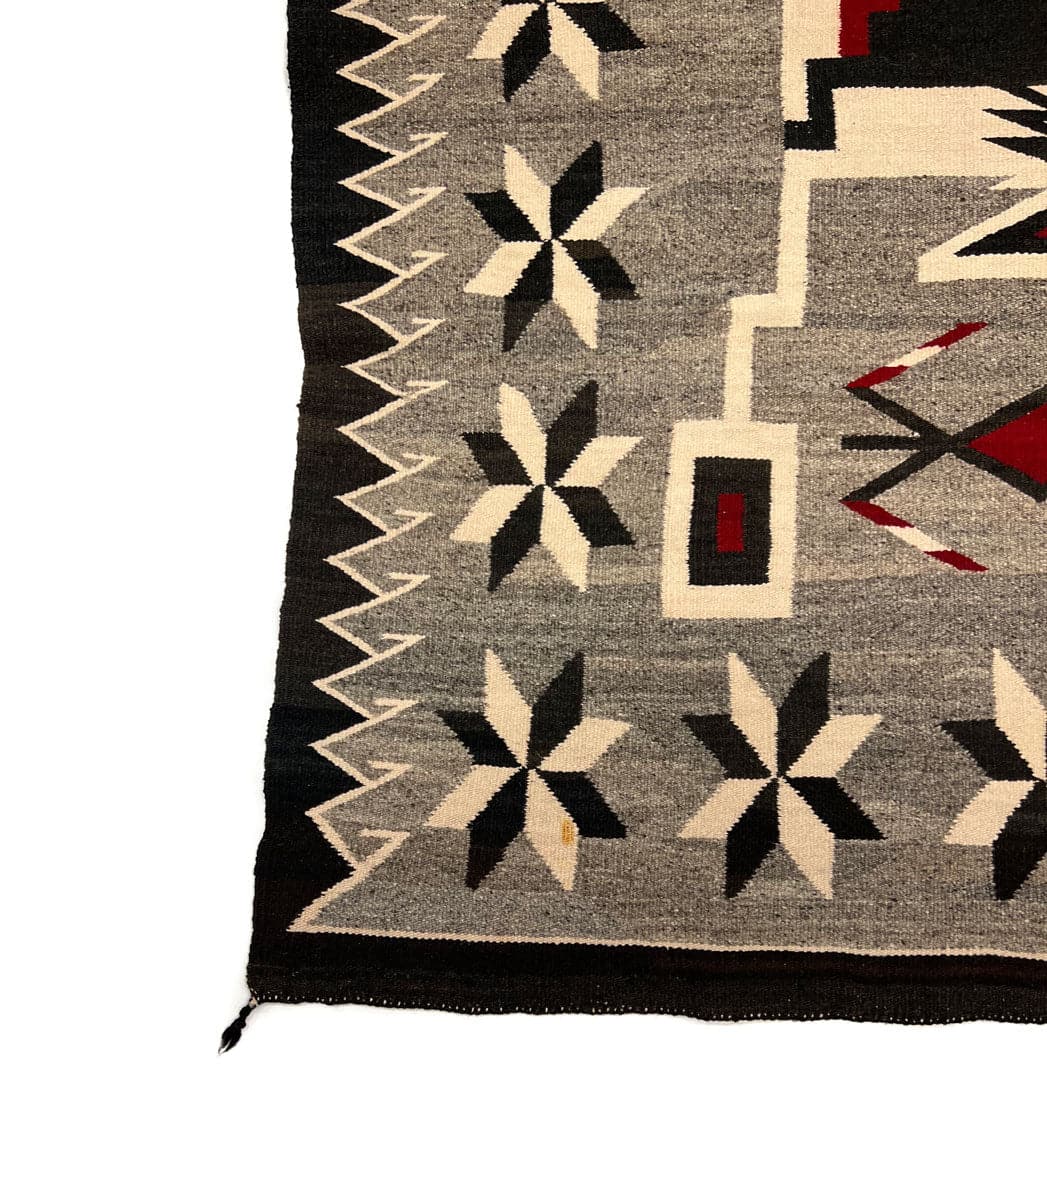 Navajo Crystal Storm Pattern Rug with Valero Stars and Waterbug Design c. 1930s, 91" x 48.5" (T6241) 3